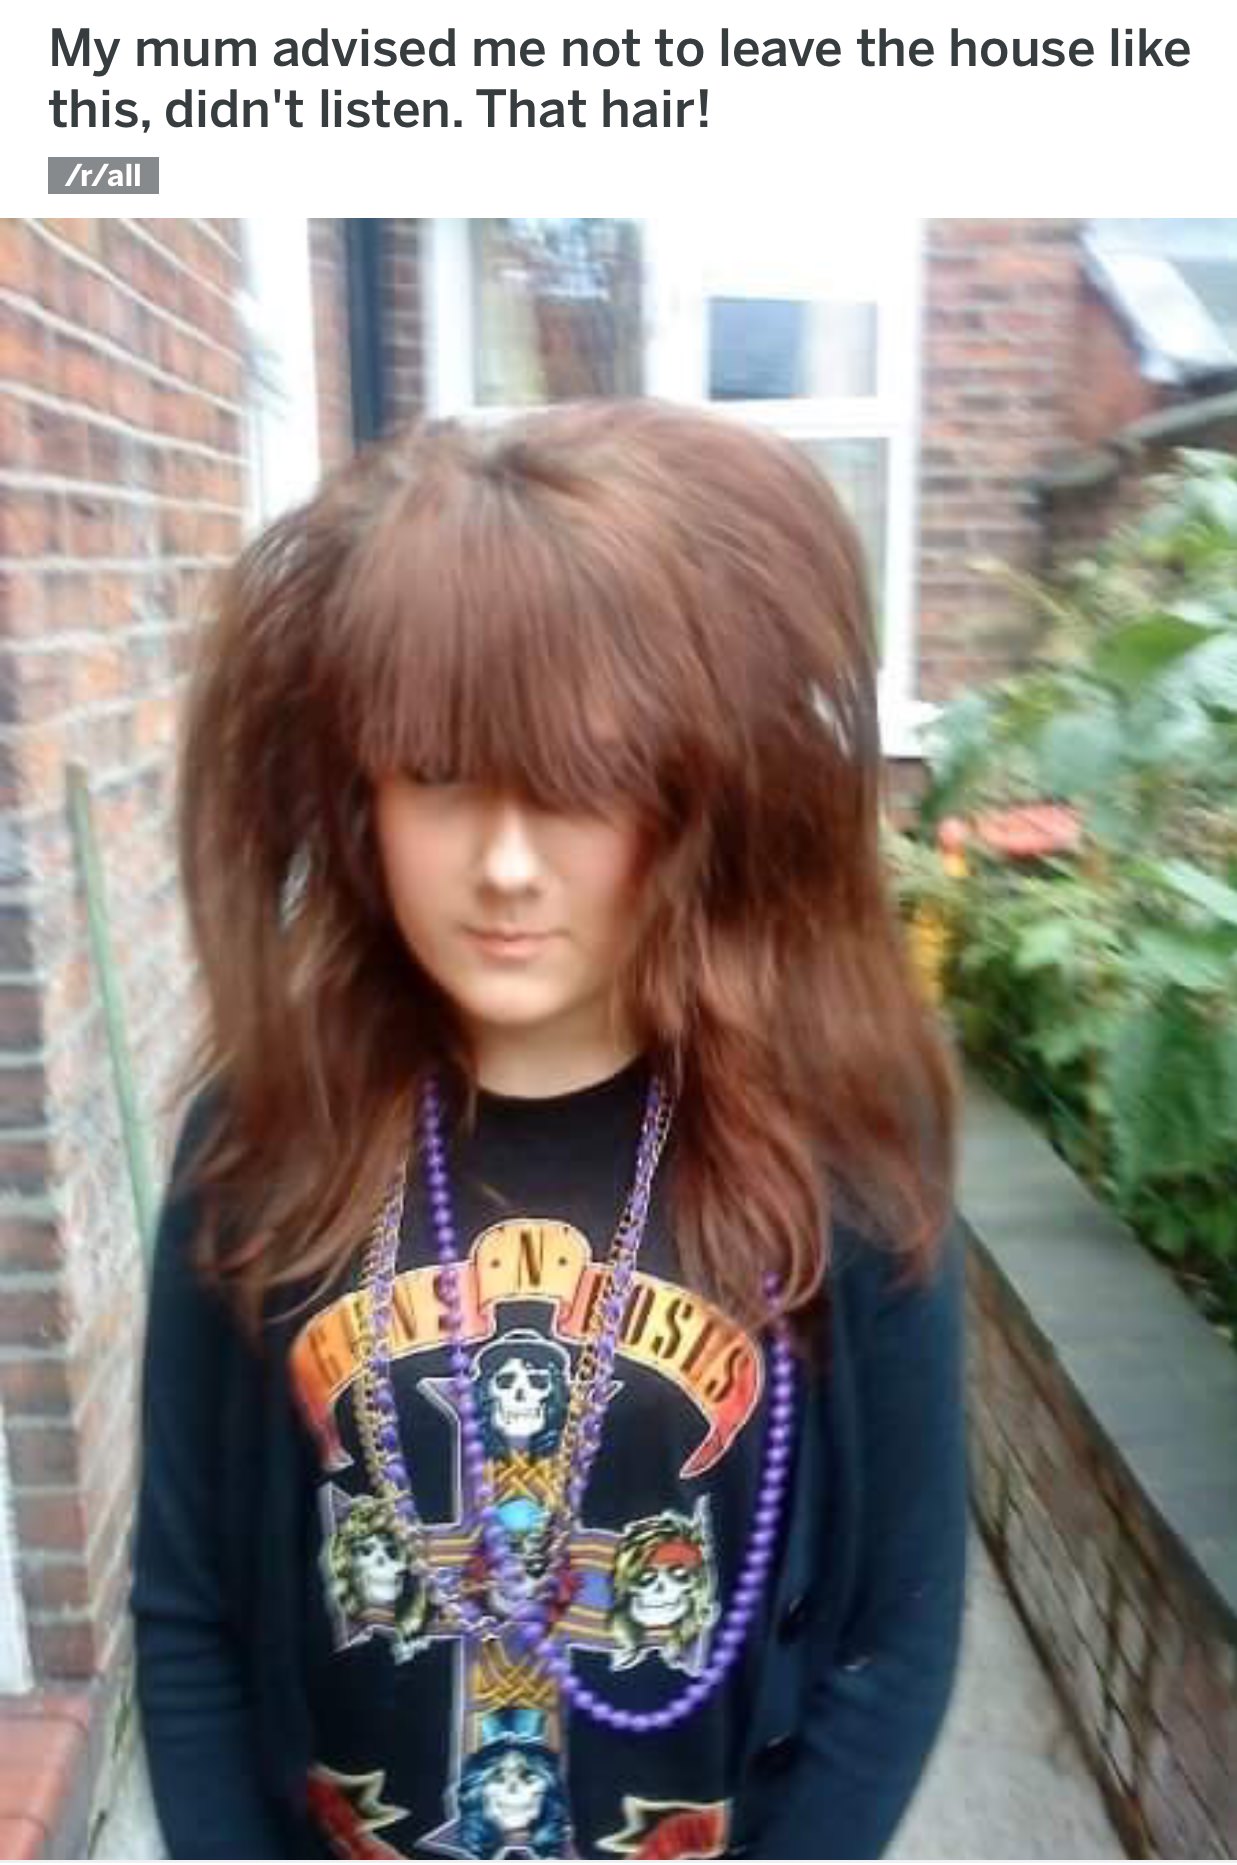 embarrassing childhood school - My mum advised me not to leave the house this, didn't listen. That hair! rall . d